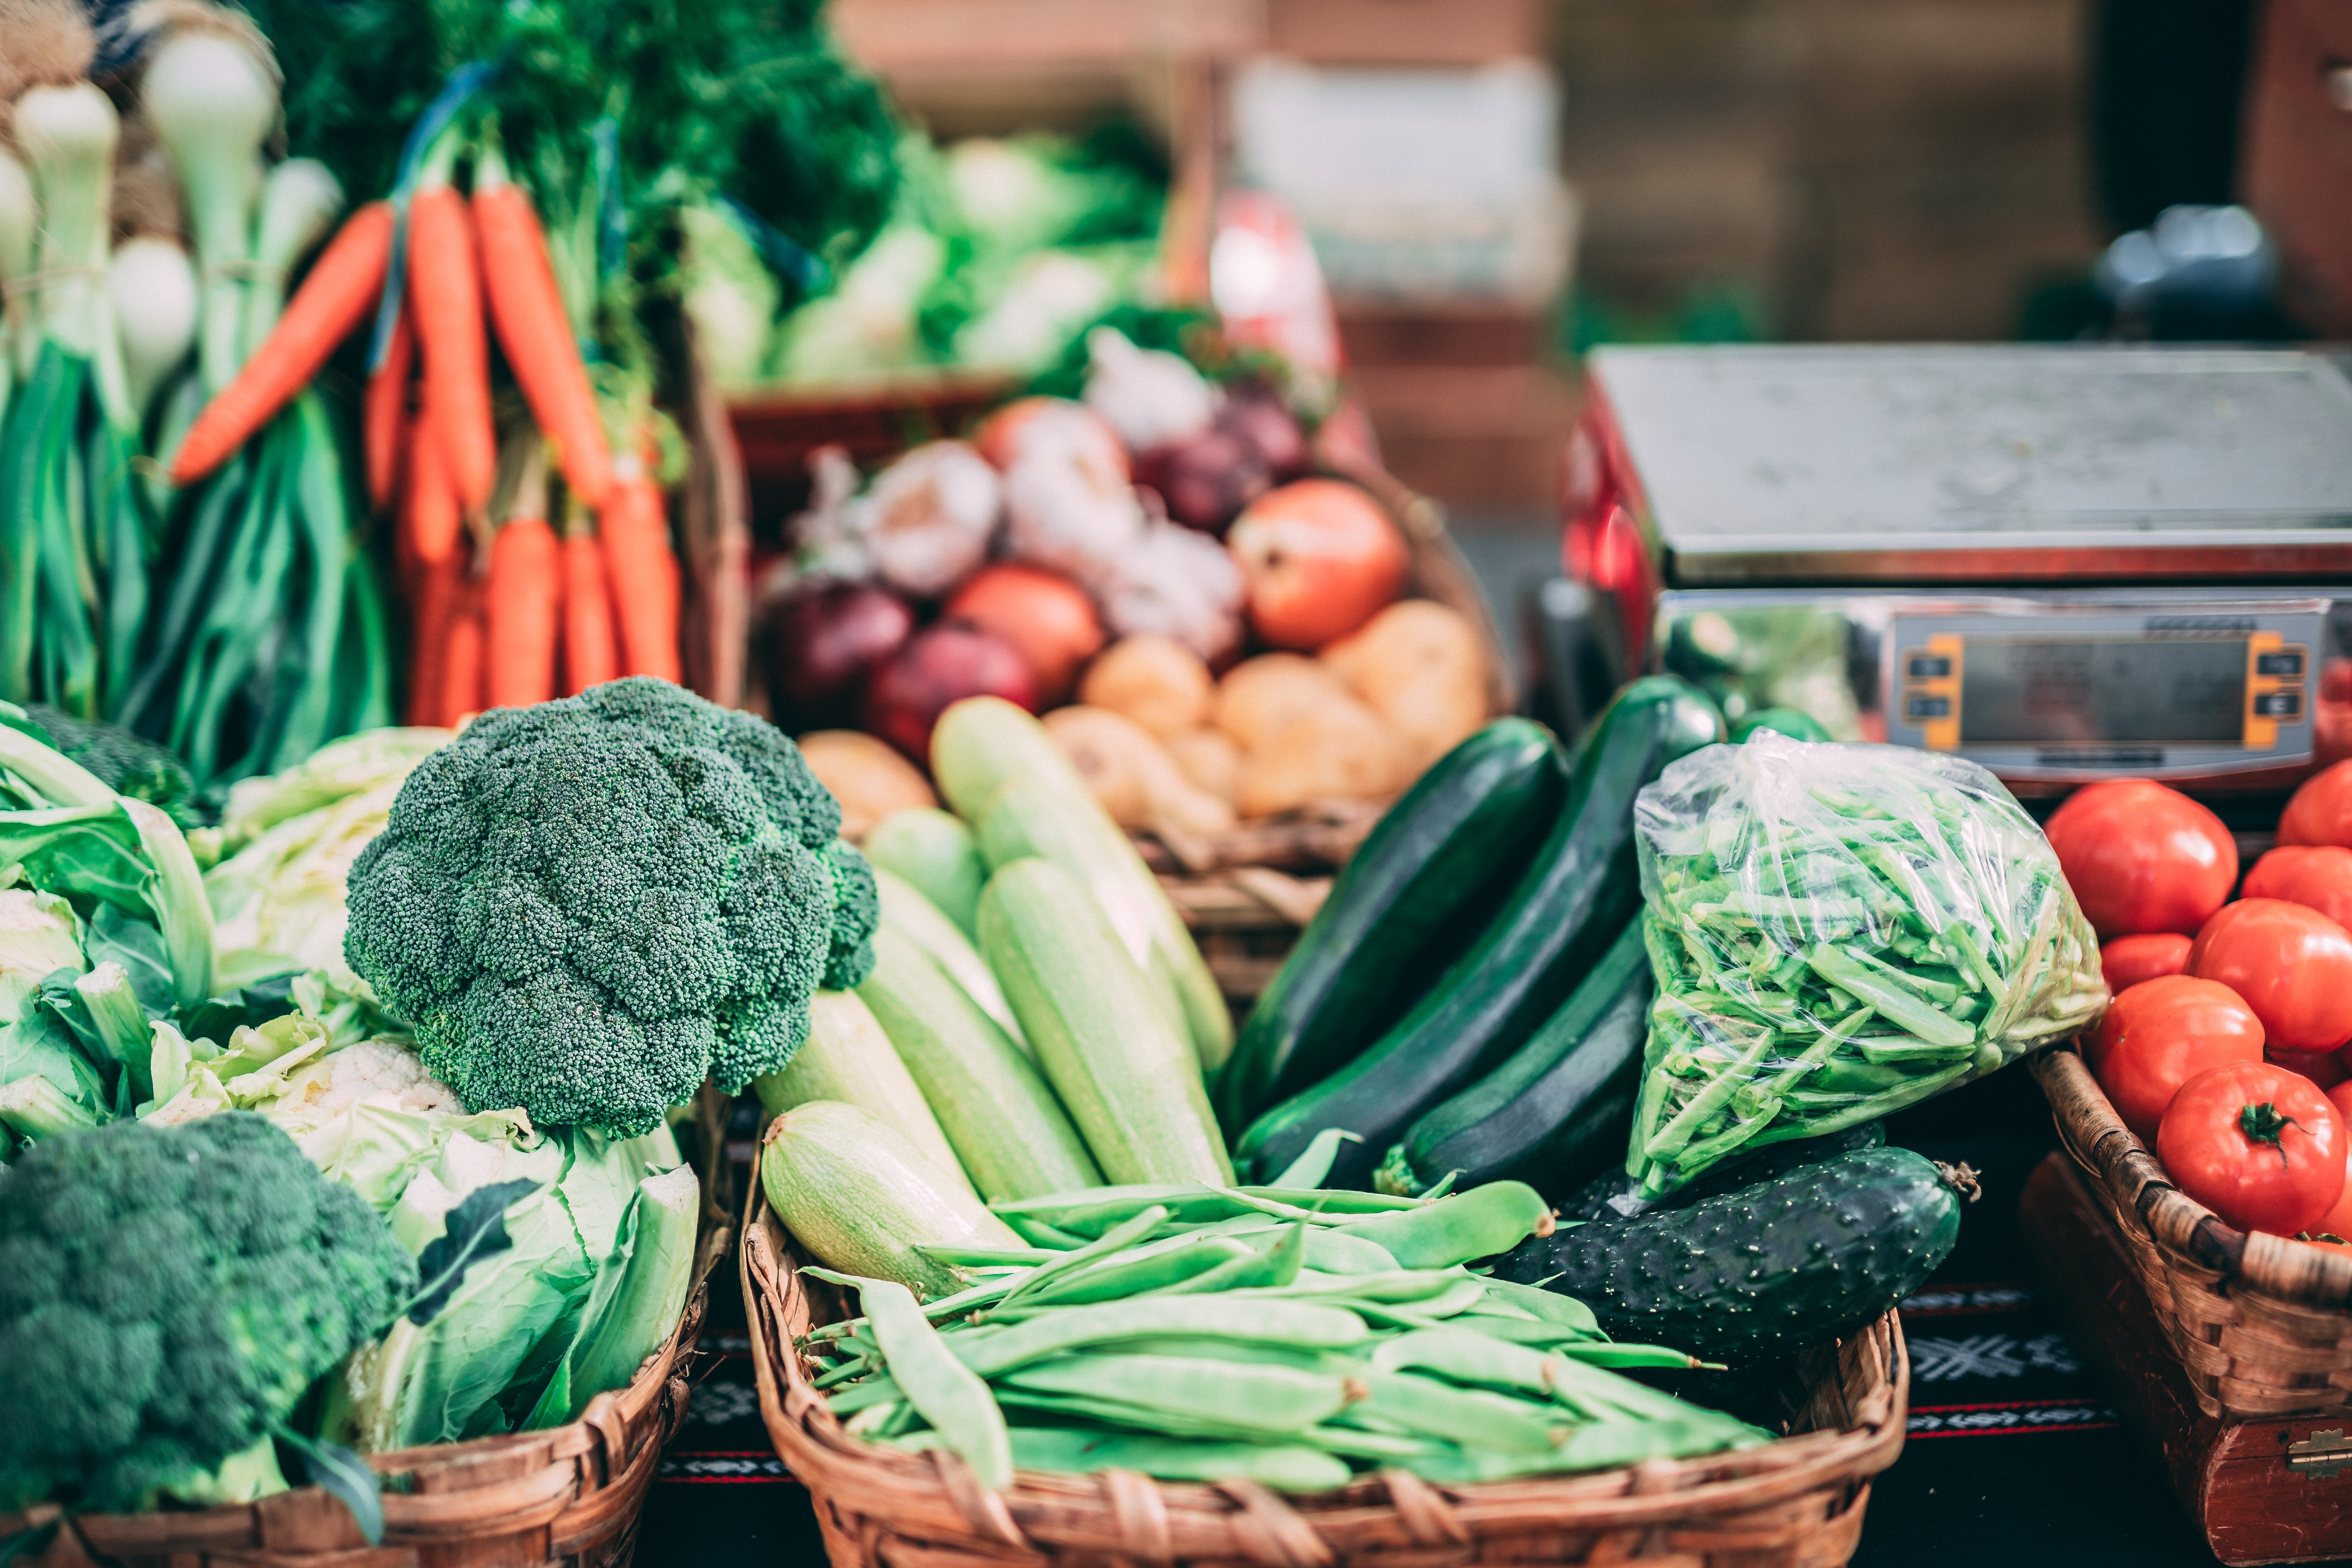 Andrew started selling organic produce. | Source: Unsplash